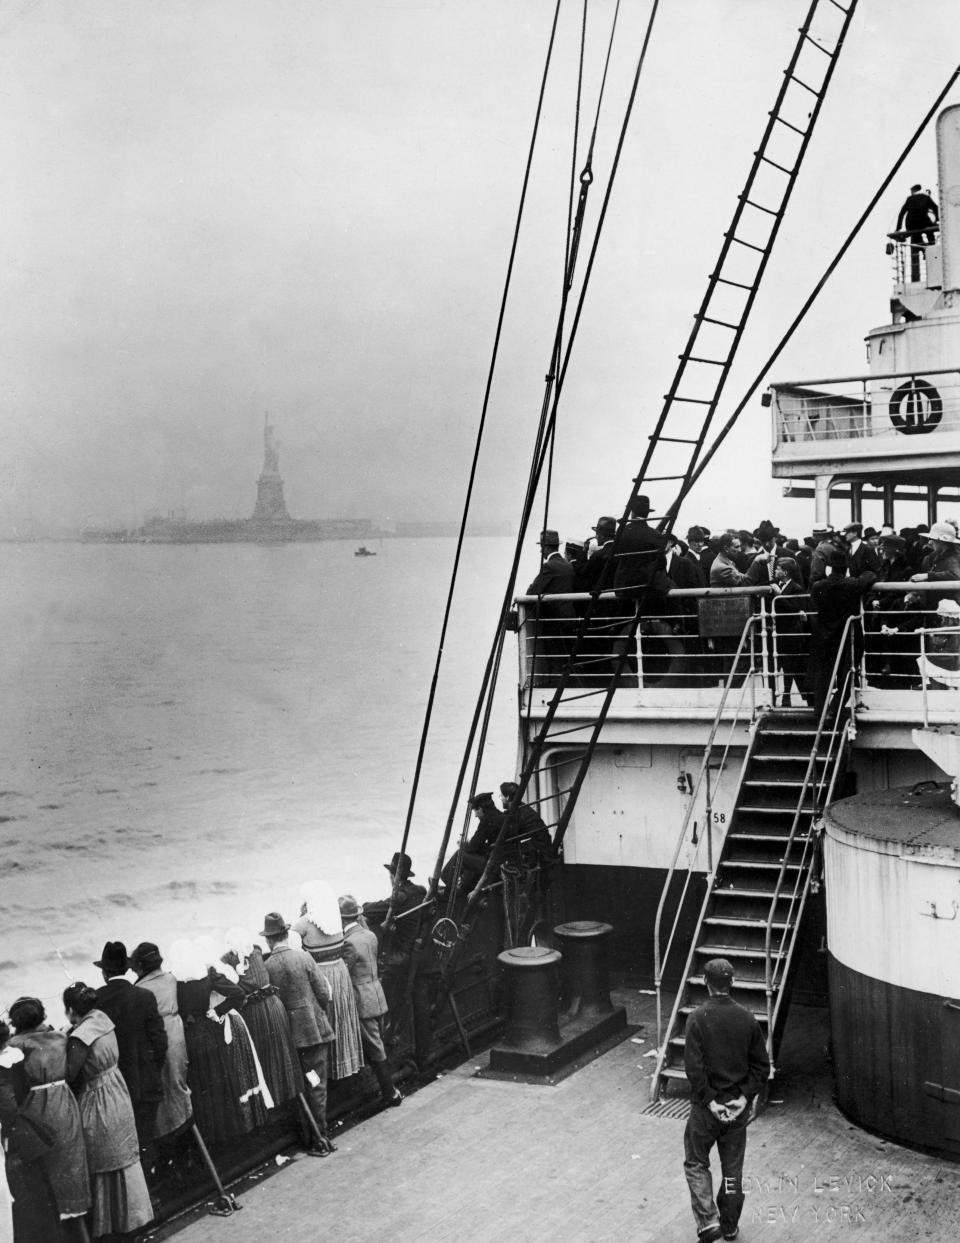 Immigrants view the Statue of Liberty while entering New York harbor aboard an ocean liner en route to Ellis Island, New York City, 1910s.